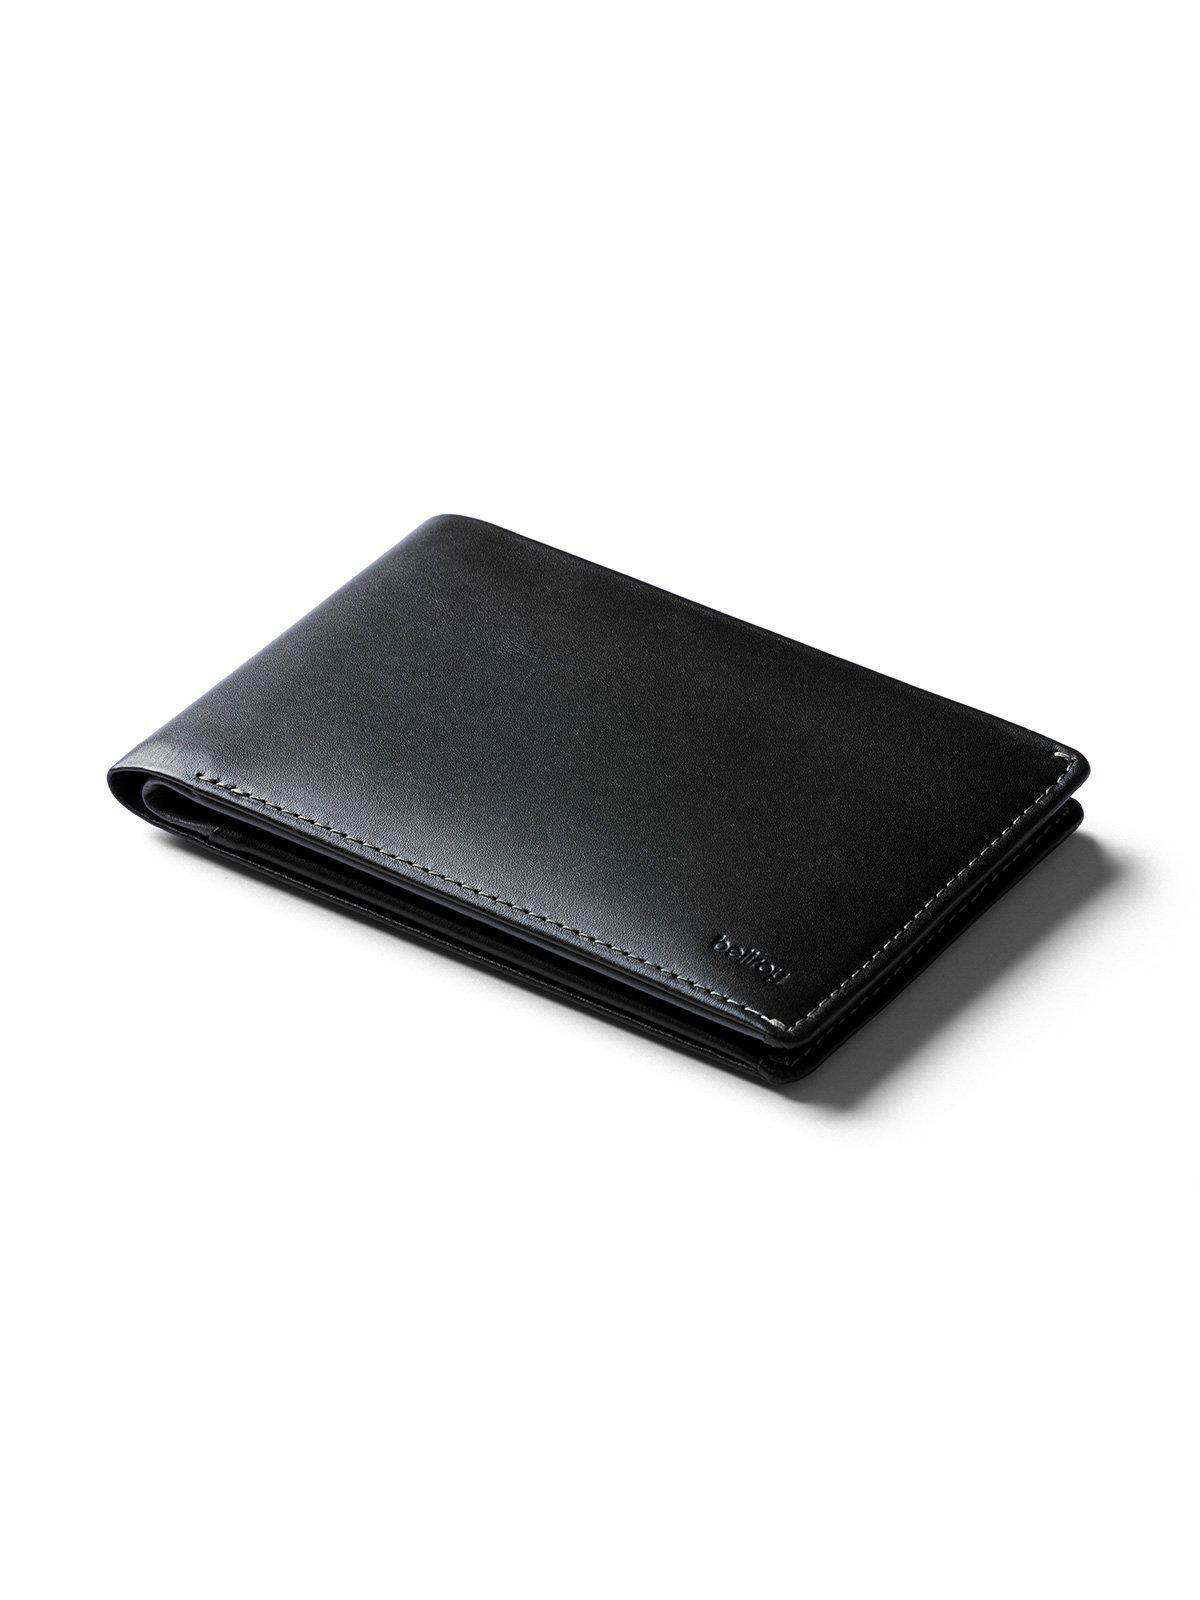 Bellroy Travel Wallet Black RFID - MORE by Morello Indonesia